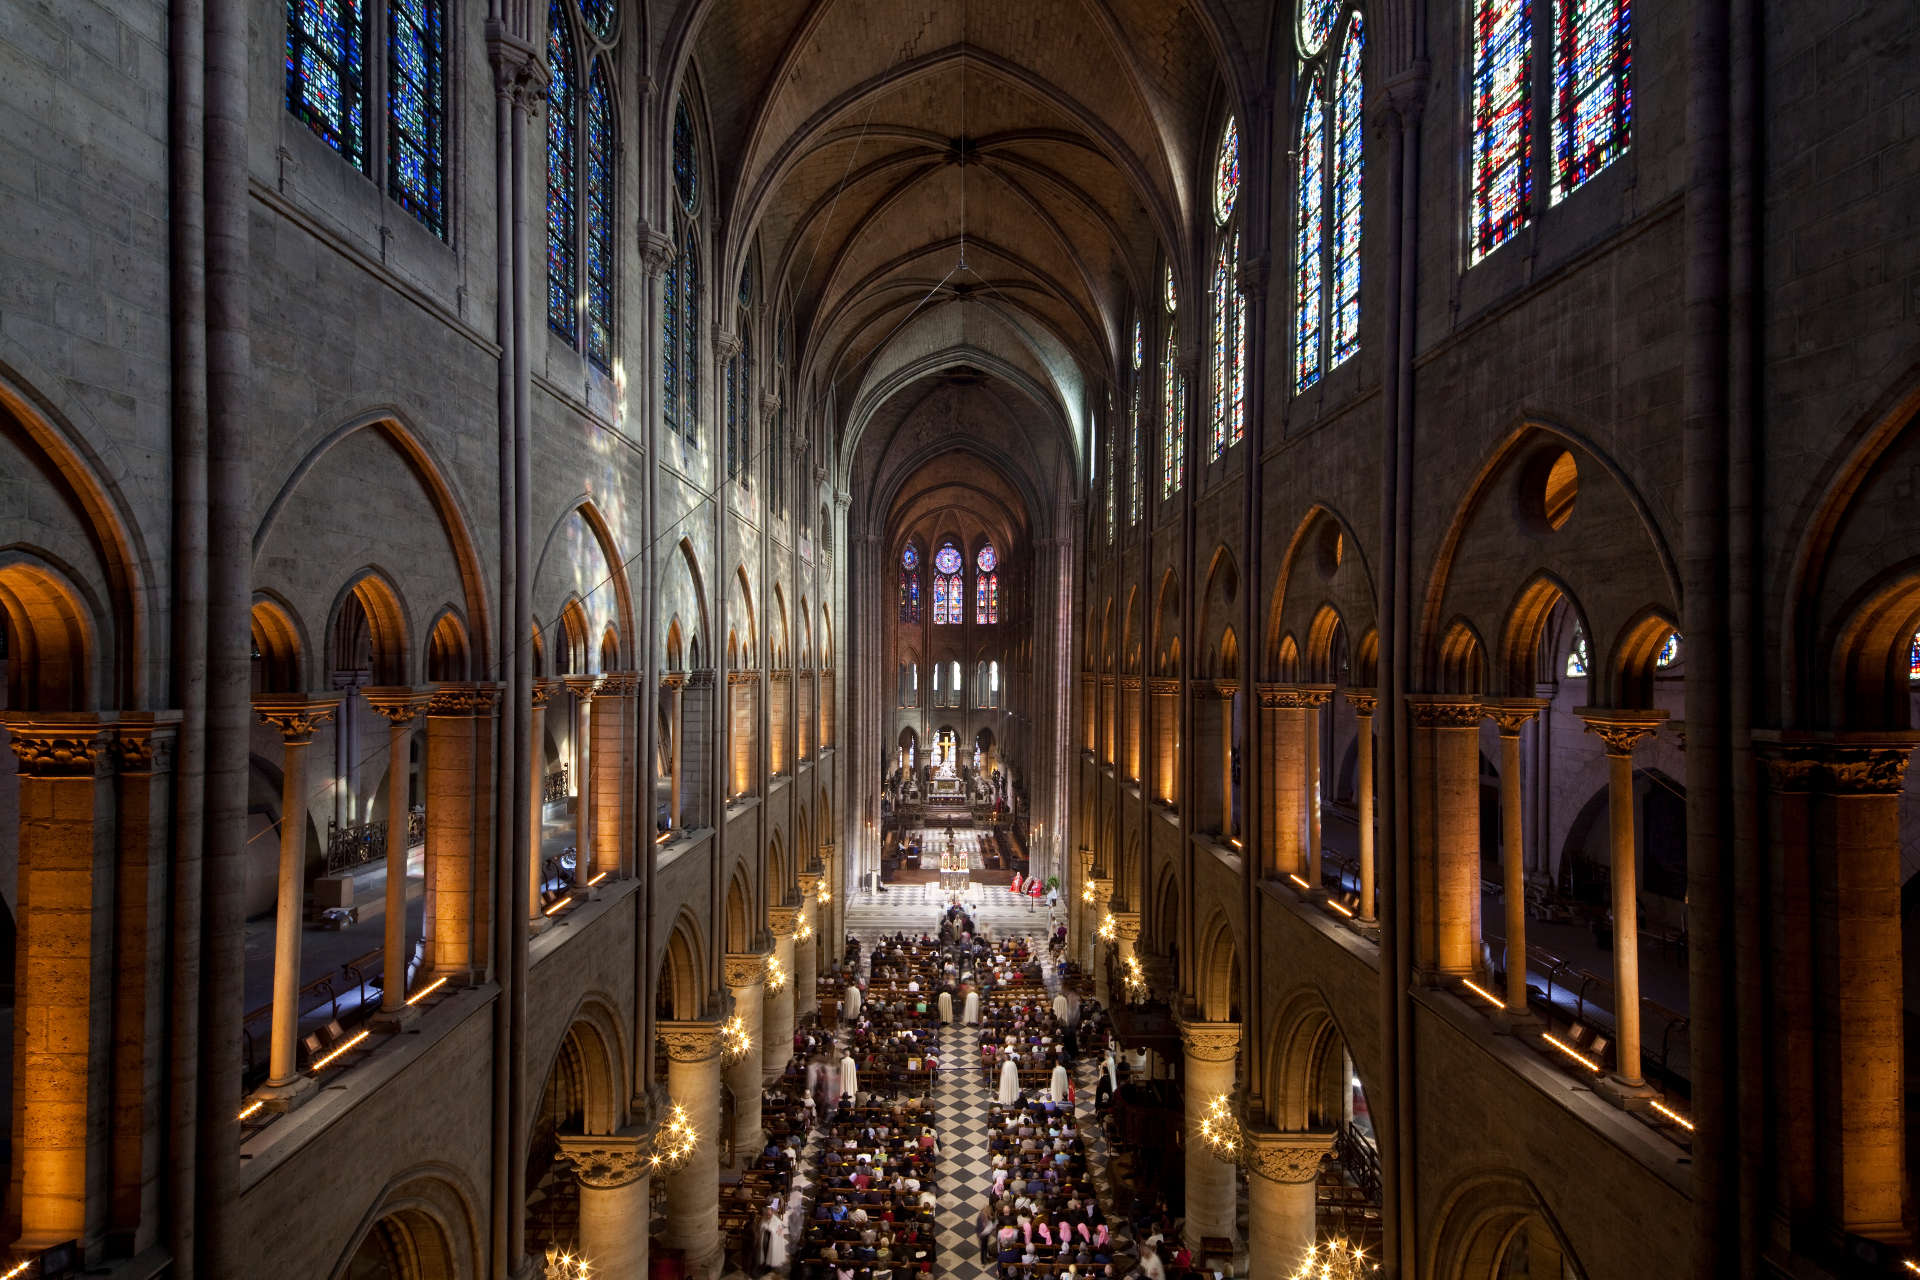 Friends of Notre-Dame de Paris is the official 501(c)(3) charity leading the international fundraising efforts to rebuild and restore Notre-Dame Cathedral.